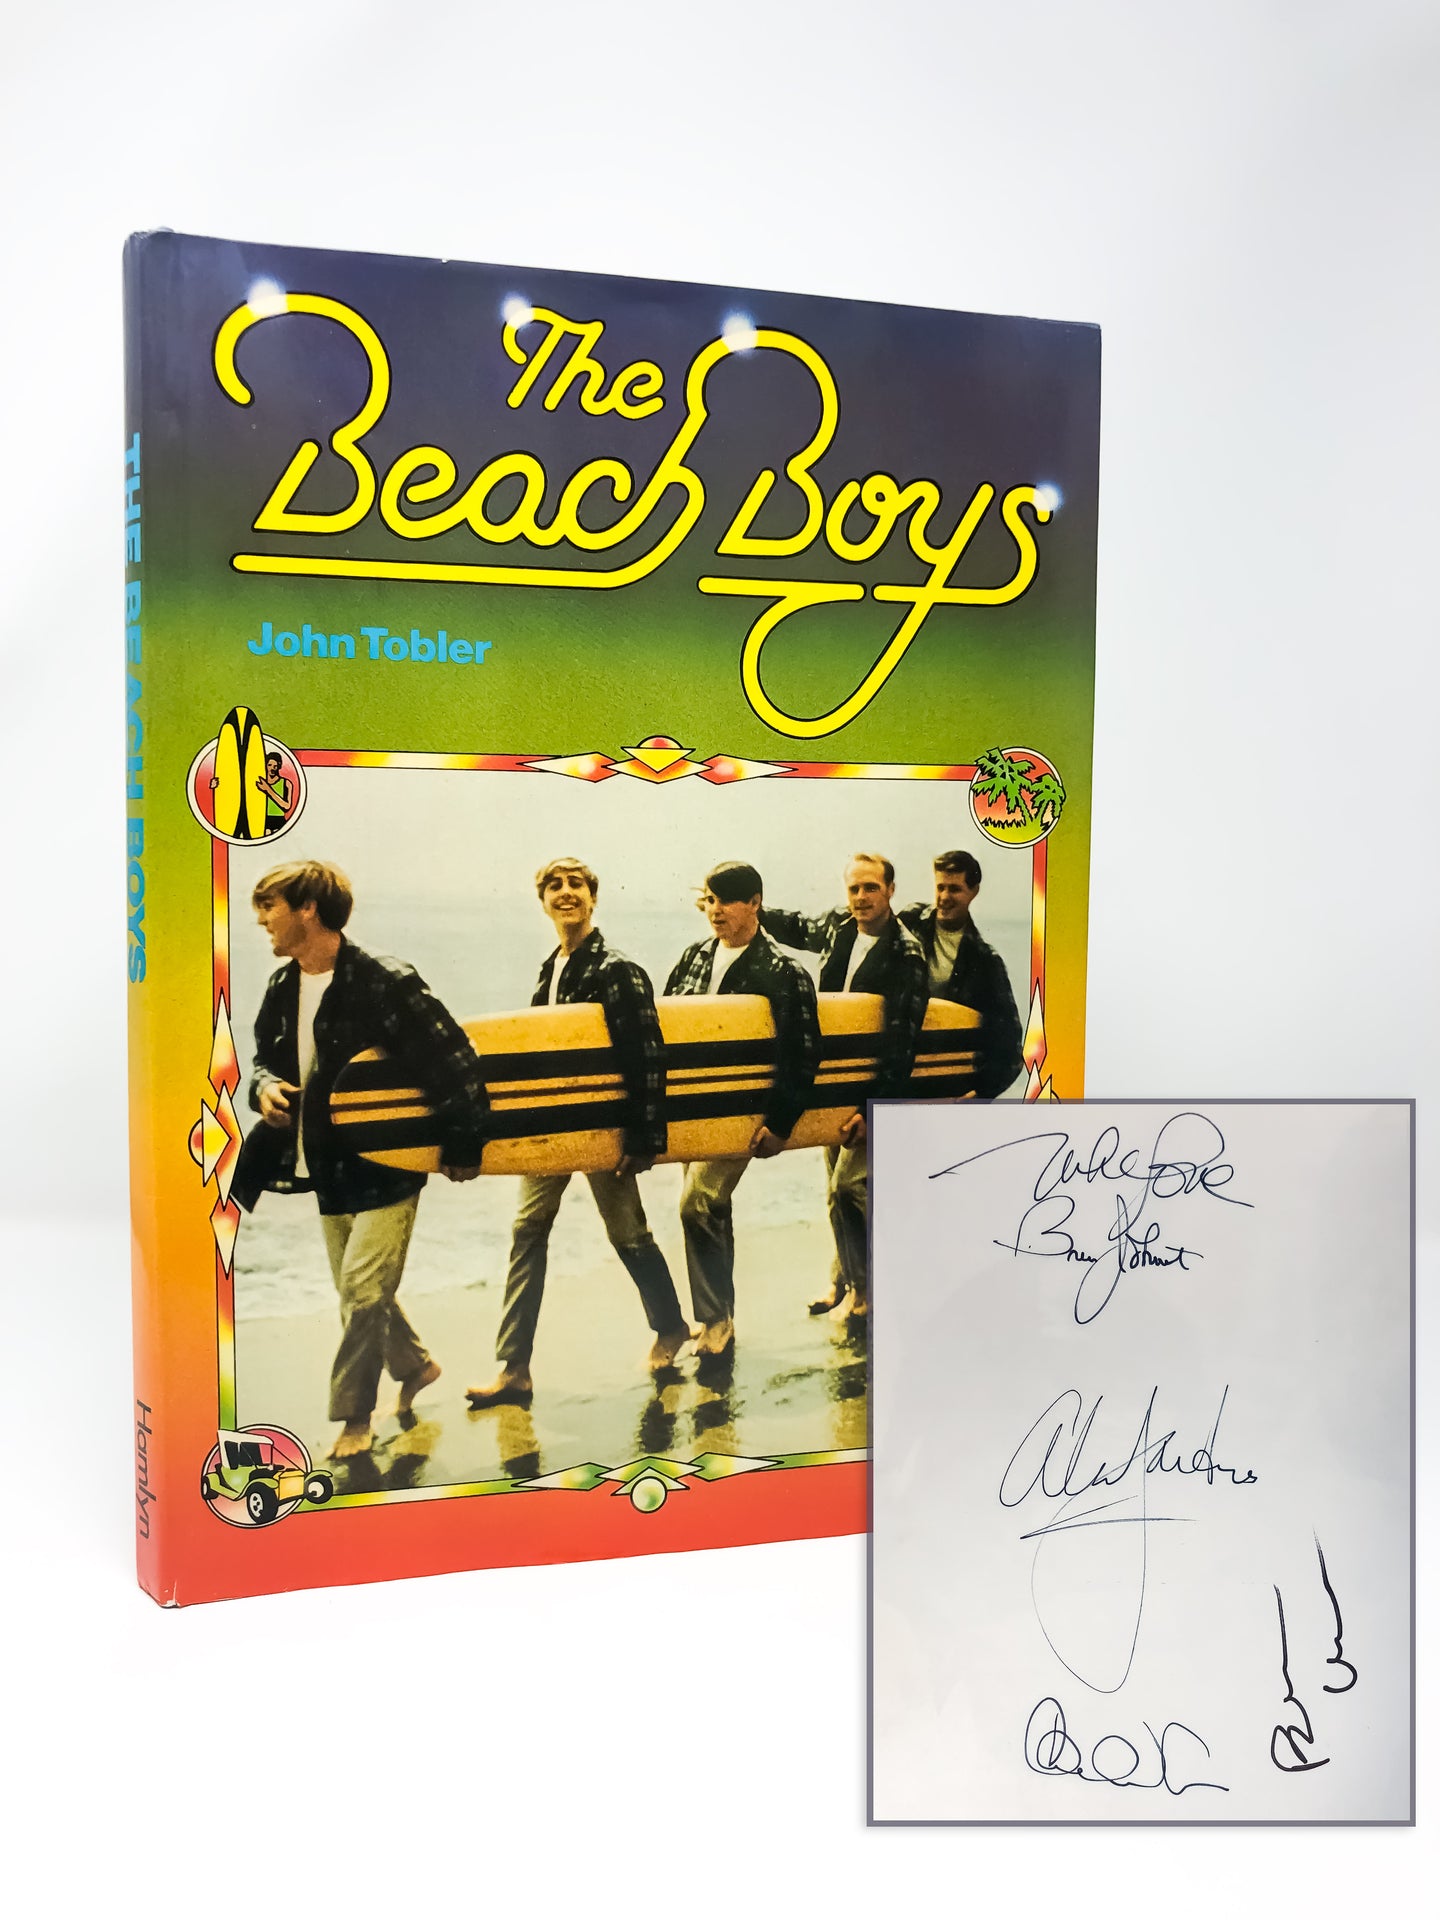 A first edition book signed by members of the Beach Boys